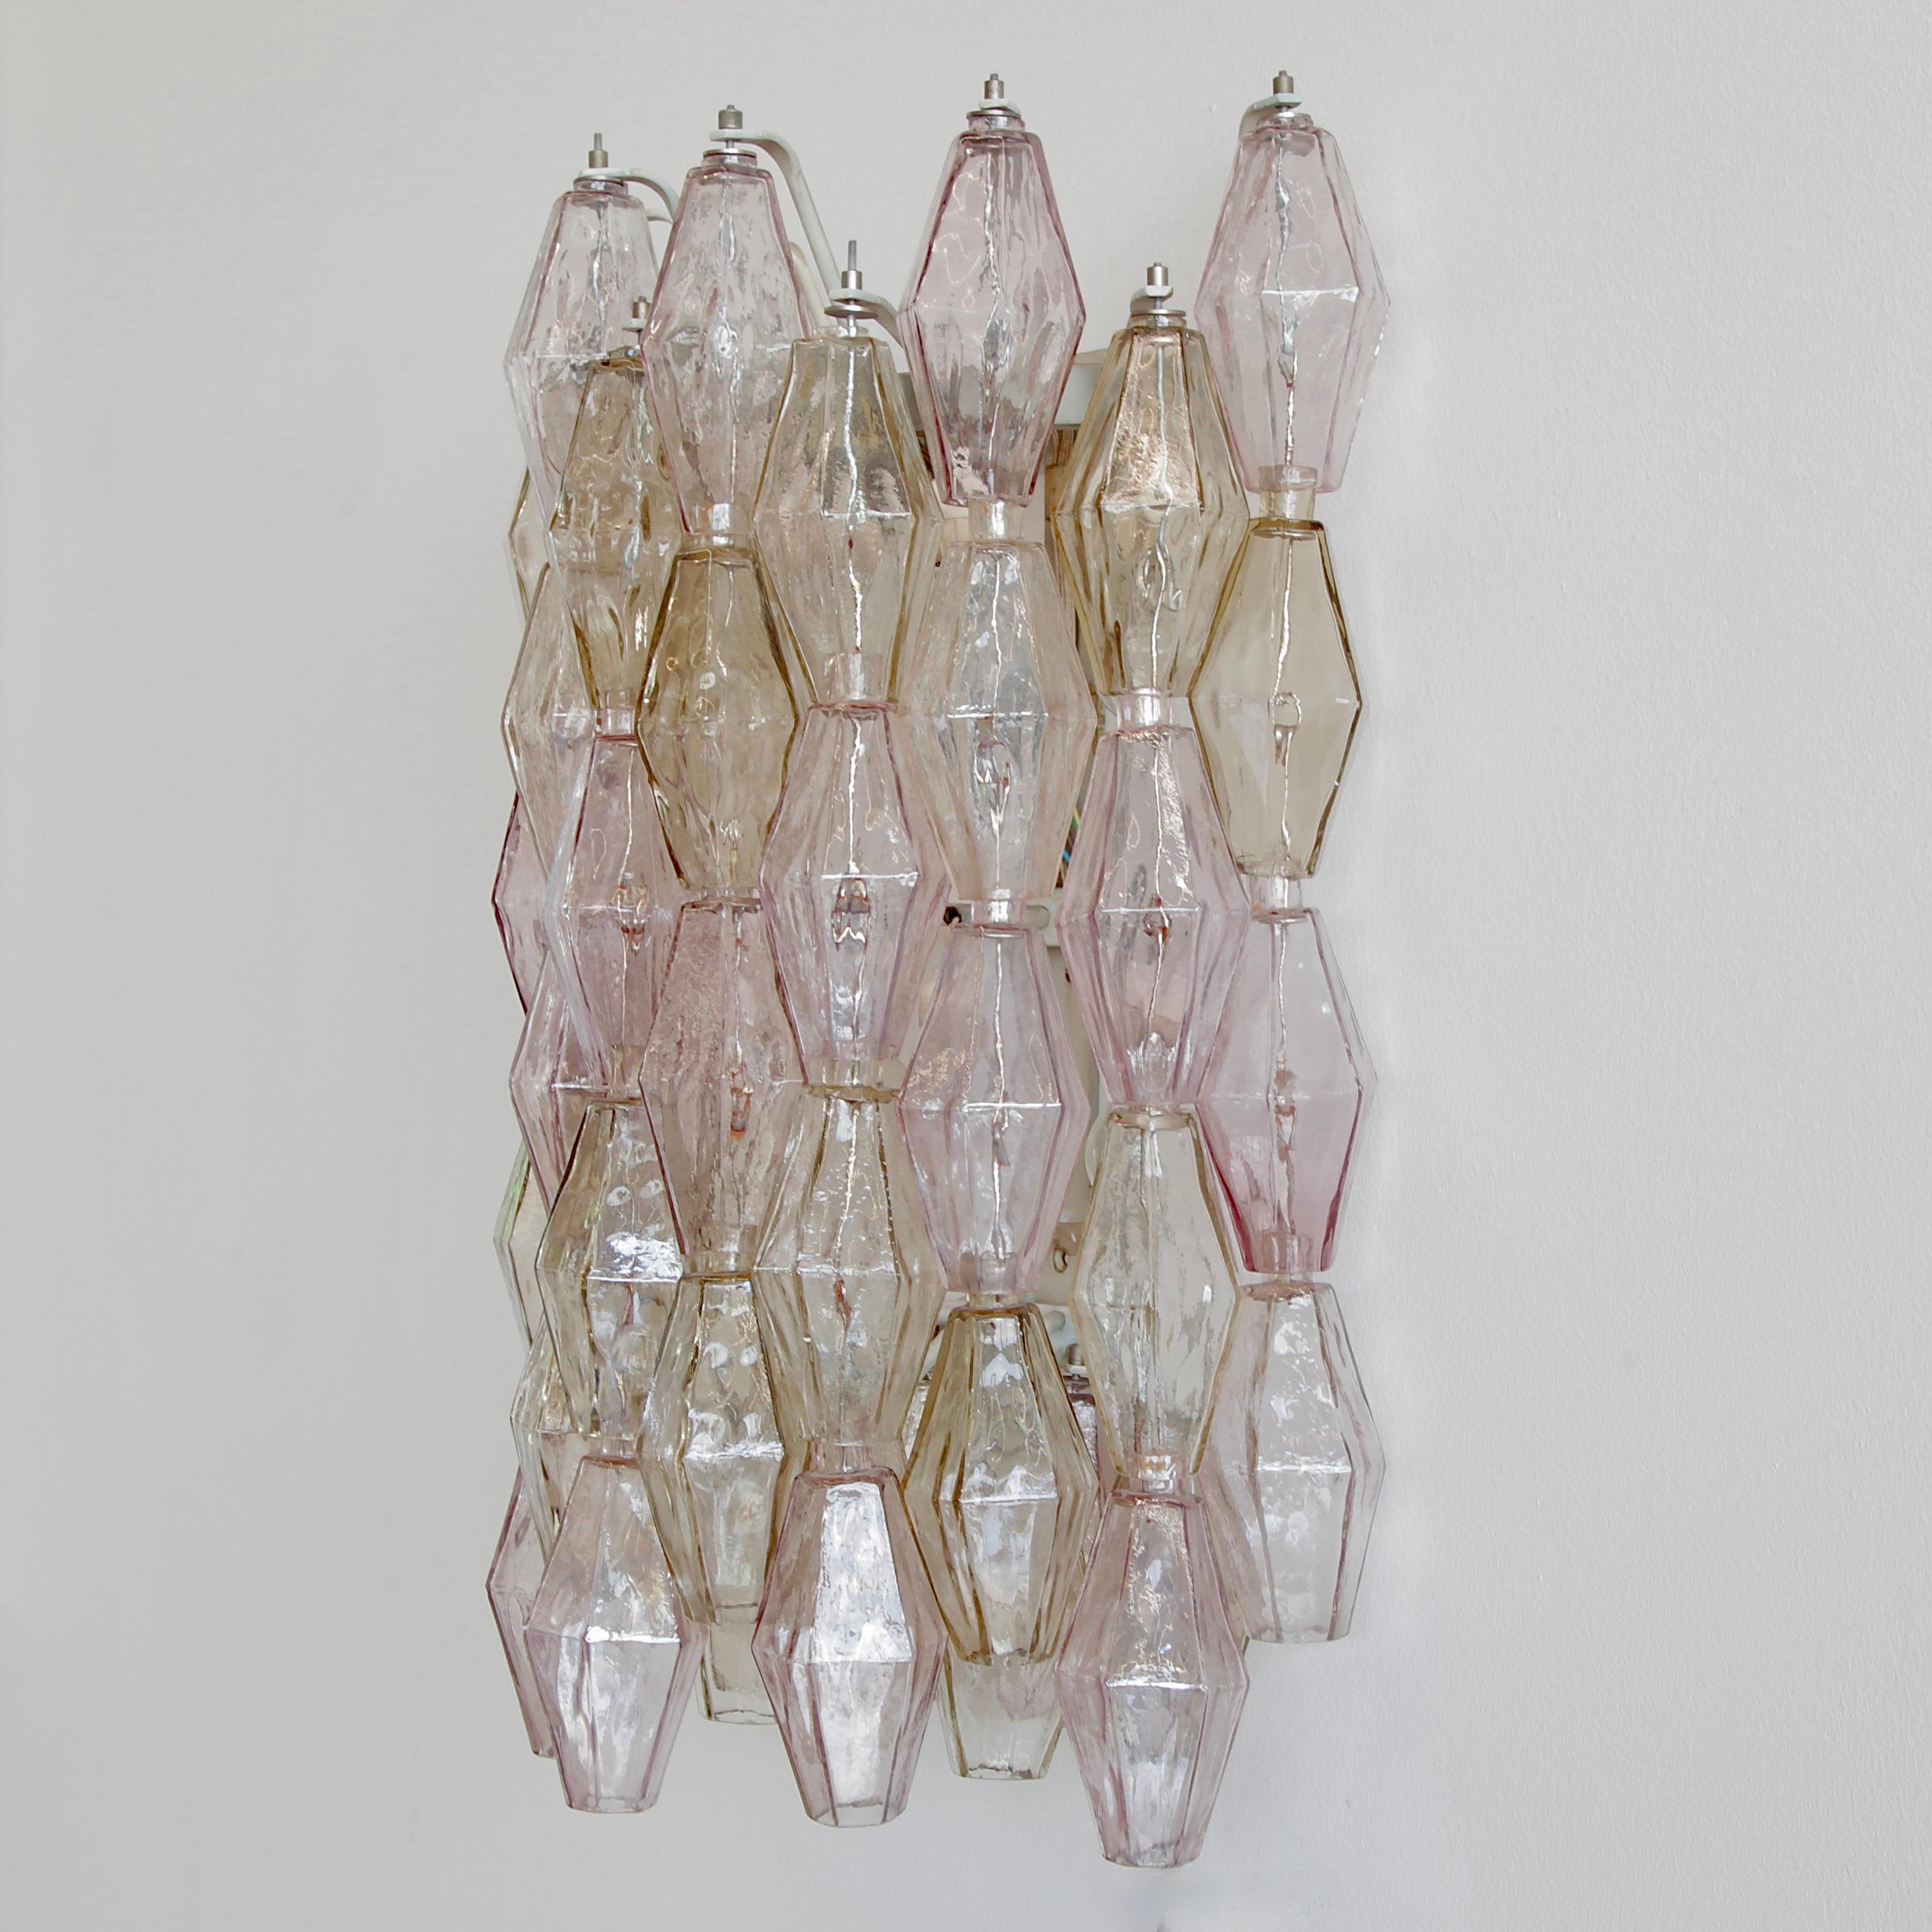 Large Poliedri glass wall sconce deigned by Carlo Scarpa, Italy, Venini Murano, 1960s.

A large wall sconce with Carlo Scarpa designed Poliedri glass pieces. Fifty hand-made glass pieces in light purple and amber colours. White metal frame with